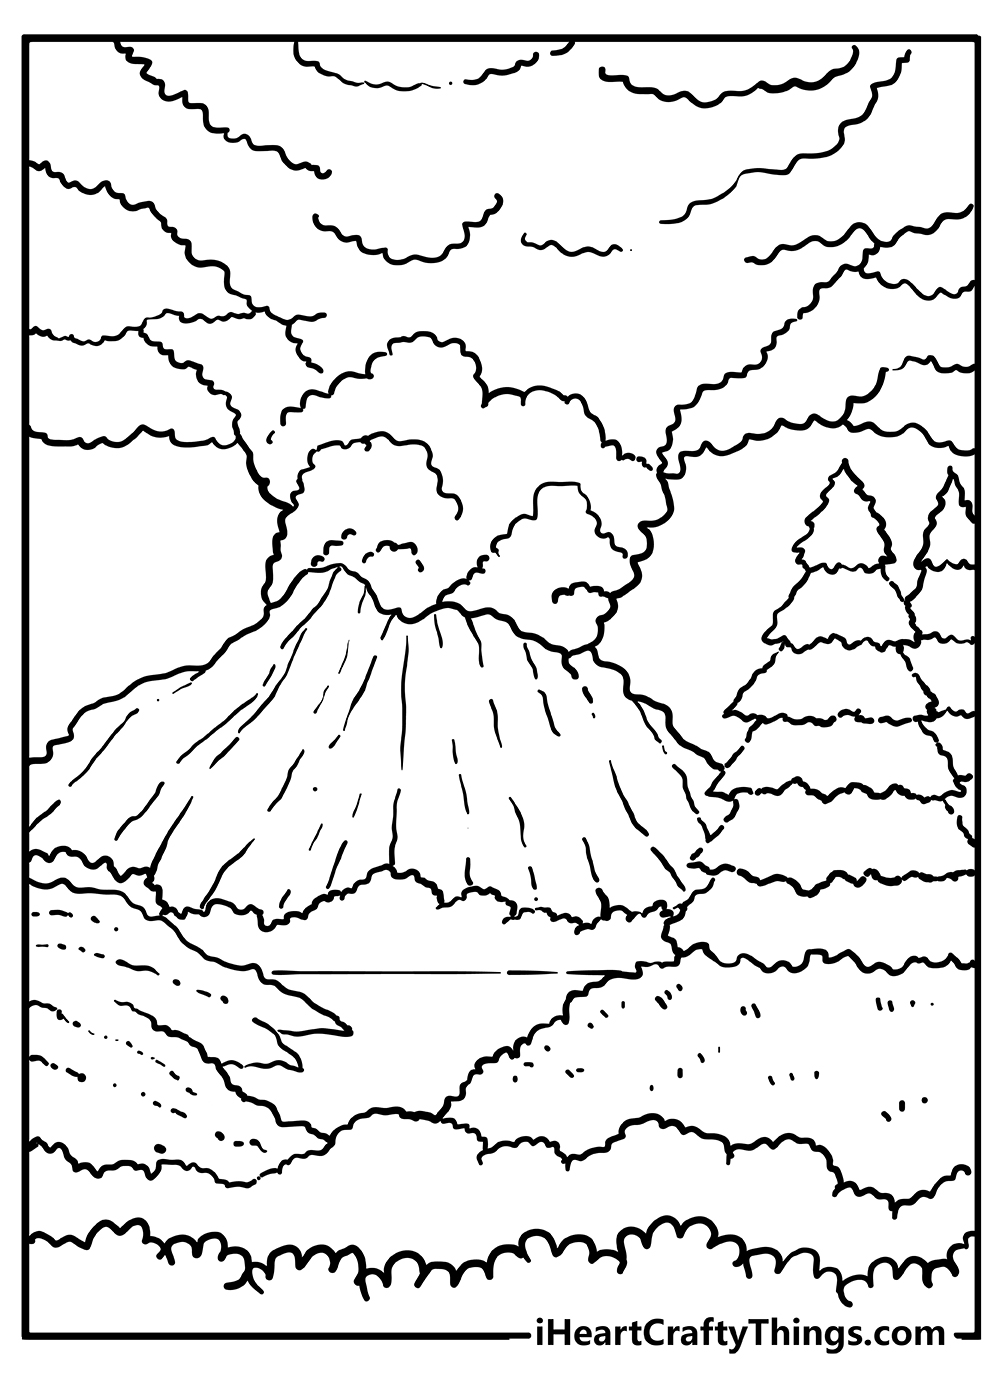 Volcano Coloring Pages for preschoolers free printable